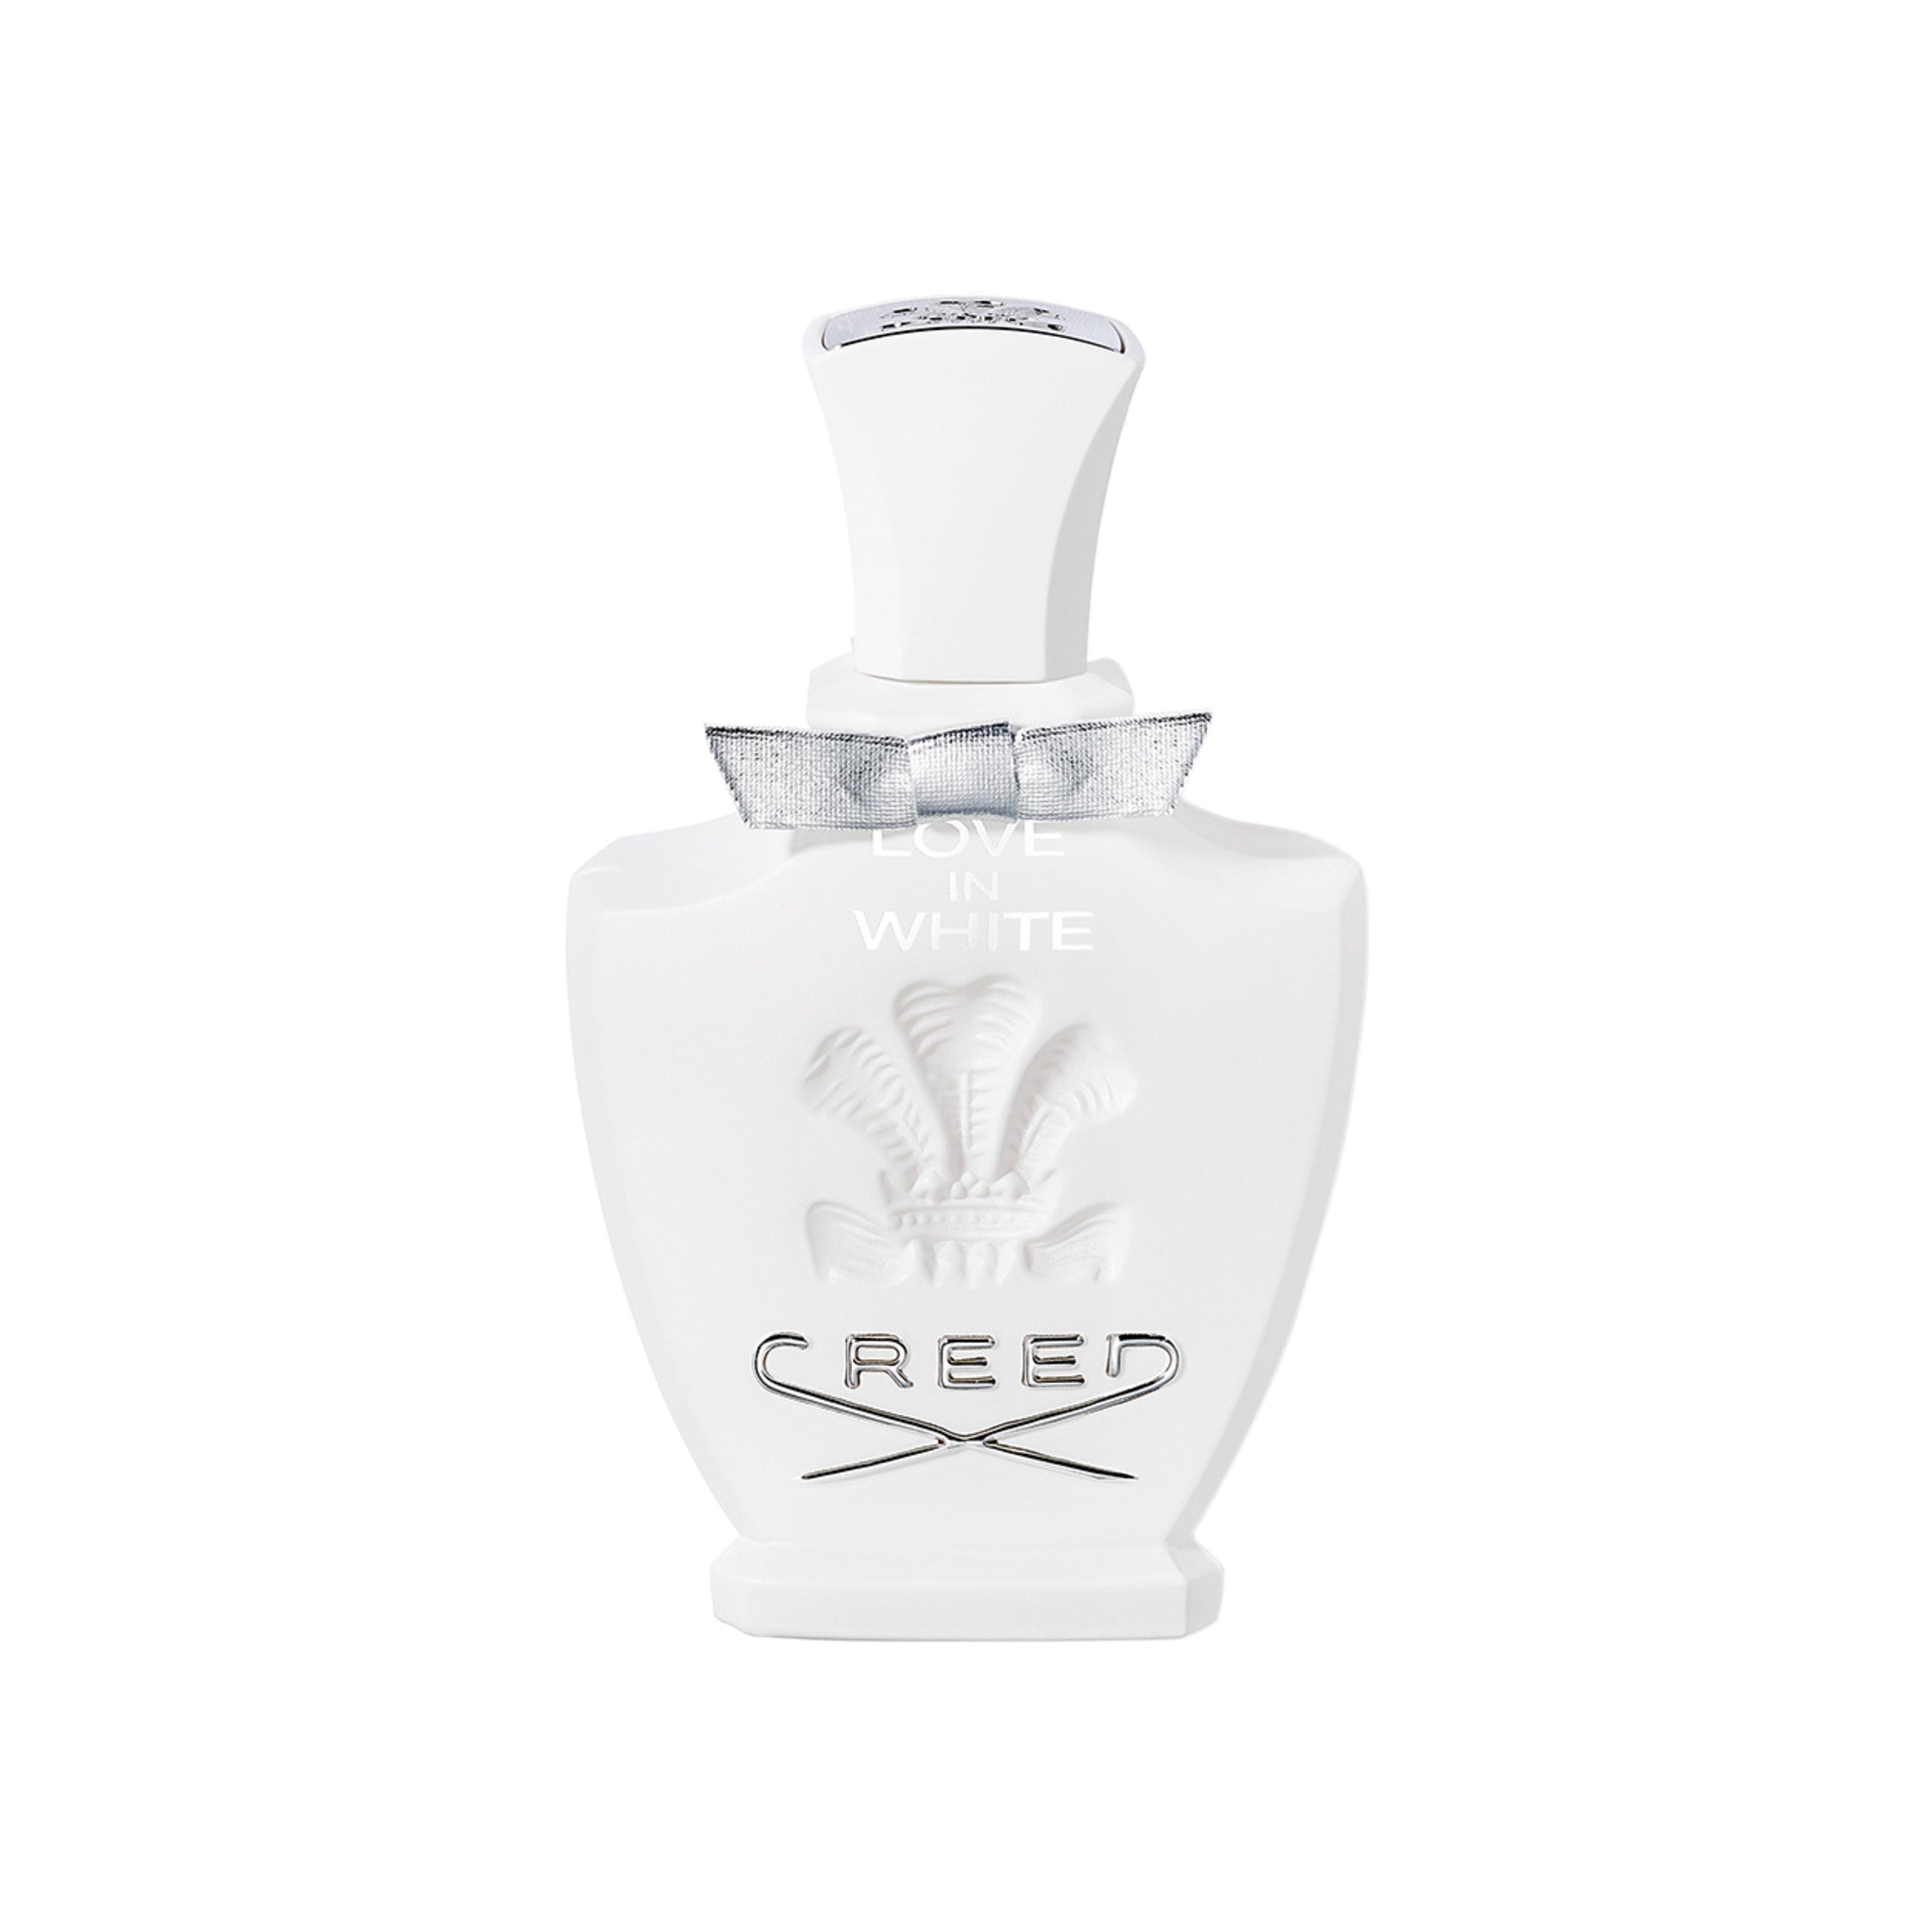 Creed Love In White Size variant: 2.53 fl oz main image.